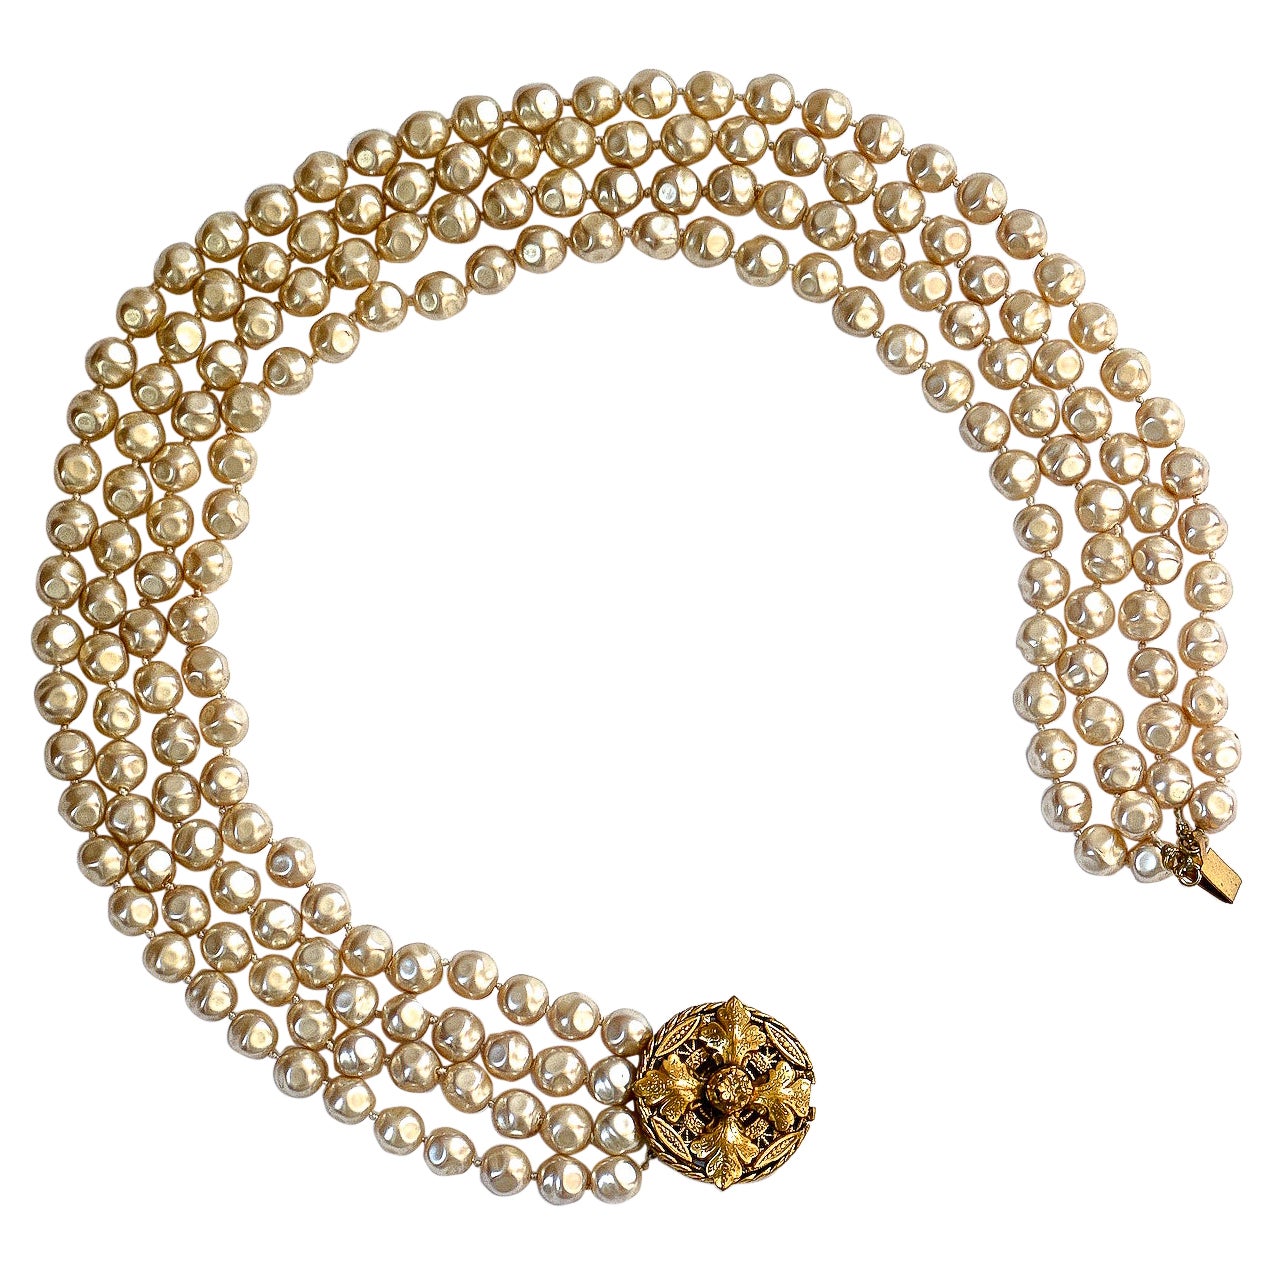 Chanel Vintage 1983 Four-Strand Baroque Pearl Necklace, Ornate Medallion Clasp